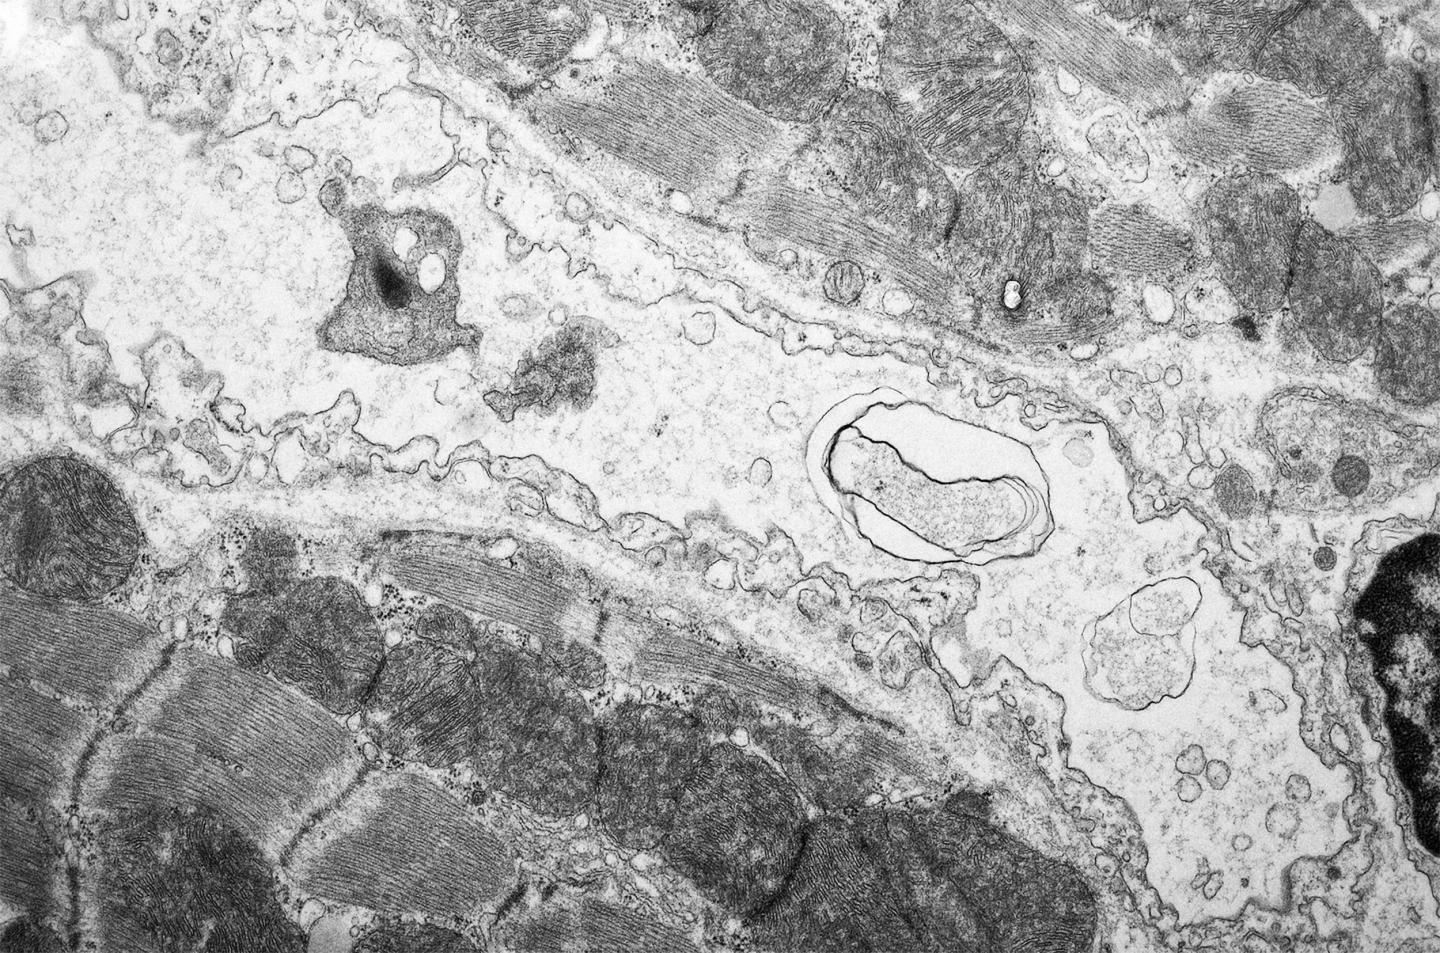 Damaged Endothelial Cells in the Heart of a Doxorubicin-Treated Mouse